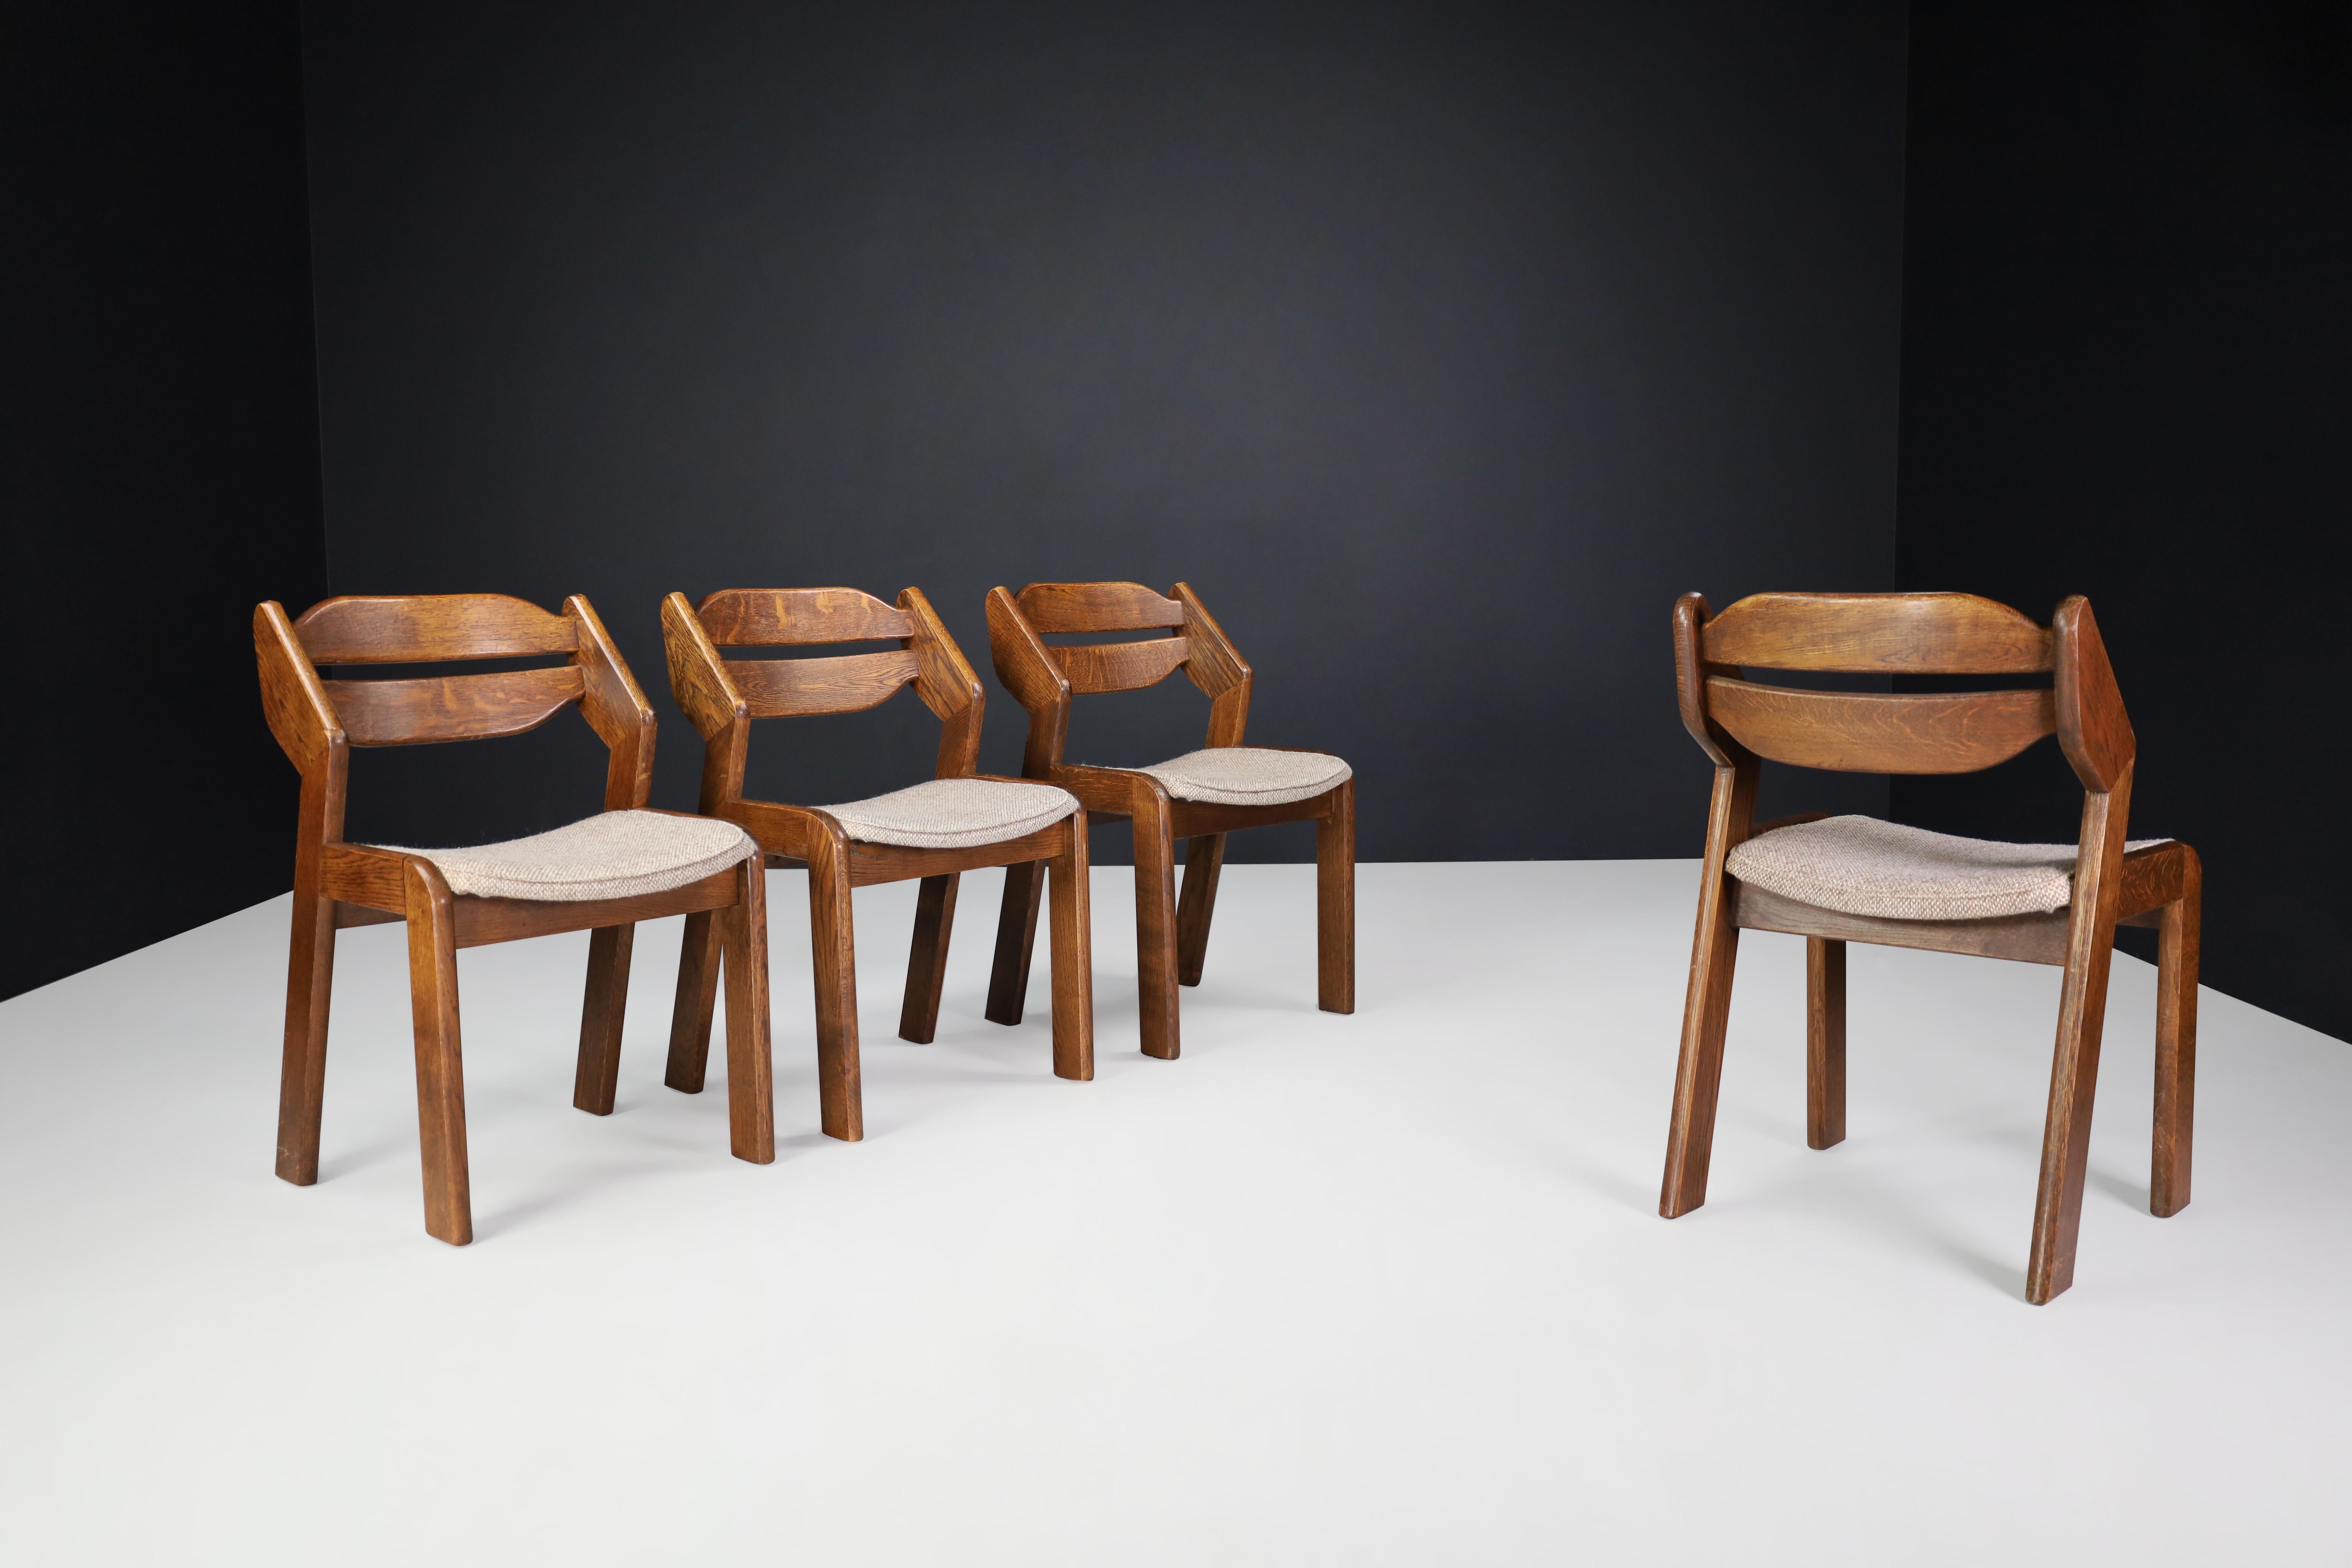 Sculptural Oak and Fabric Dining Chairs, France, 1960s For Sale 2